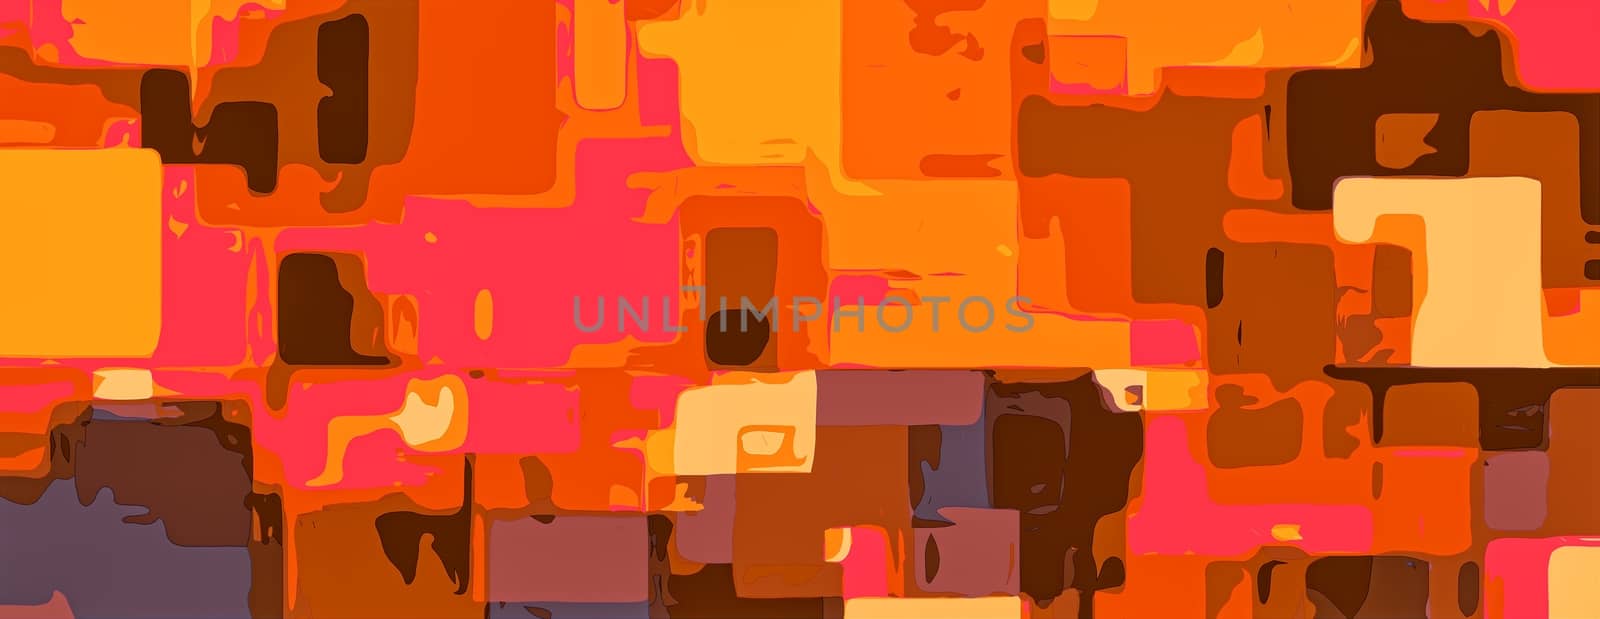 yellow orange brown and pink painting abstract background by Timmi